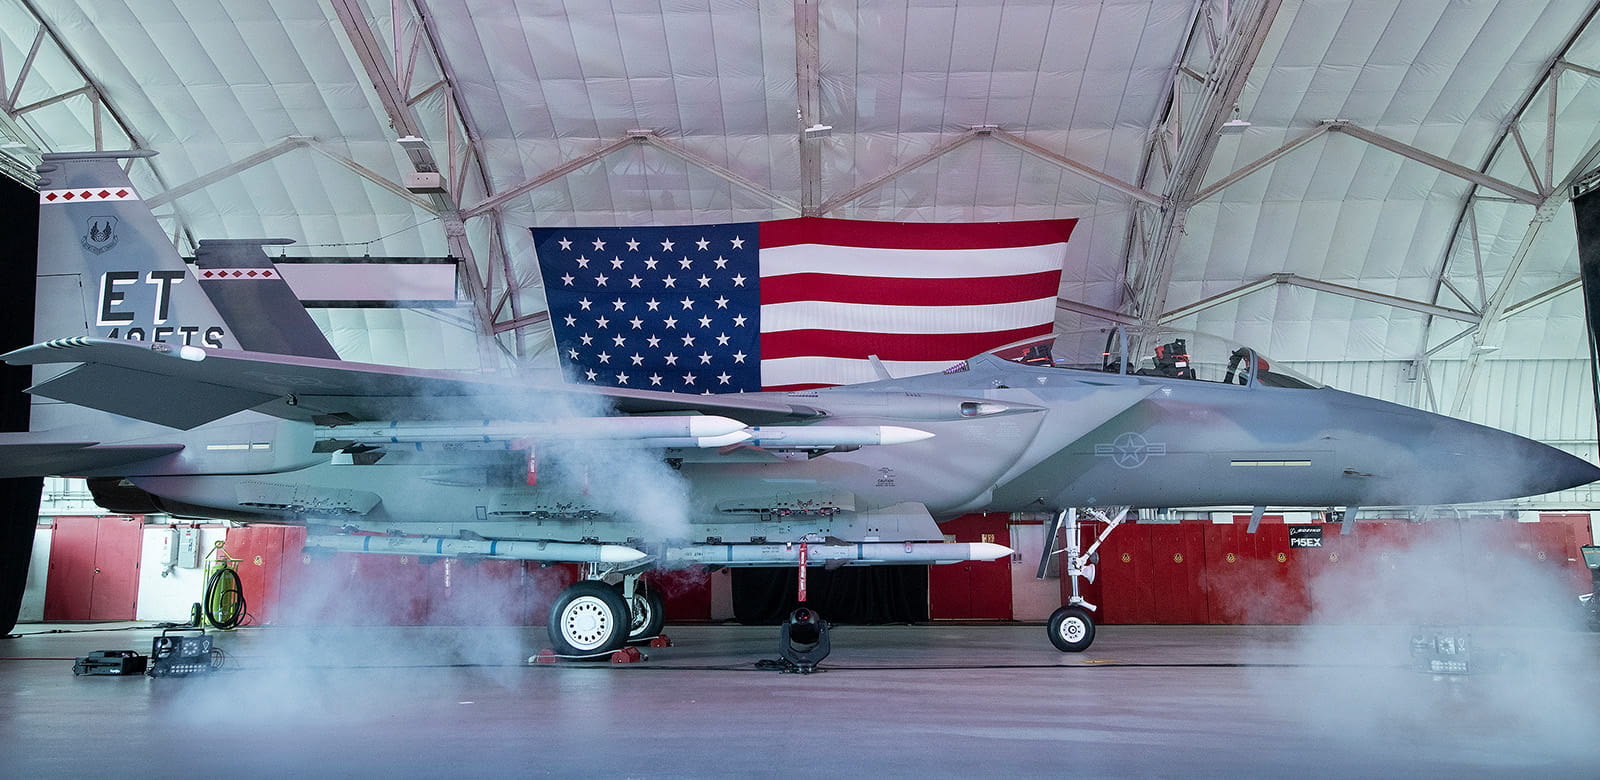 The U.S. Air Force unveiled and revealed the name of its newest fighter, the F-15EX Eagle II, in a ceremony April 7, 2021, at Eglin Air Force Base in Florida. (Photo: U.S. Air Force)